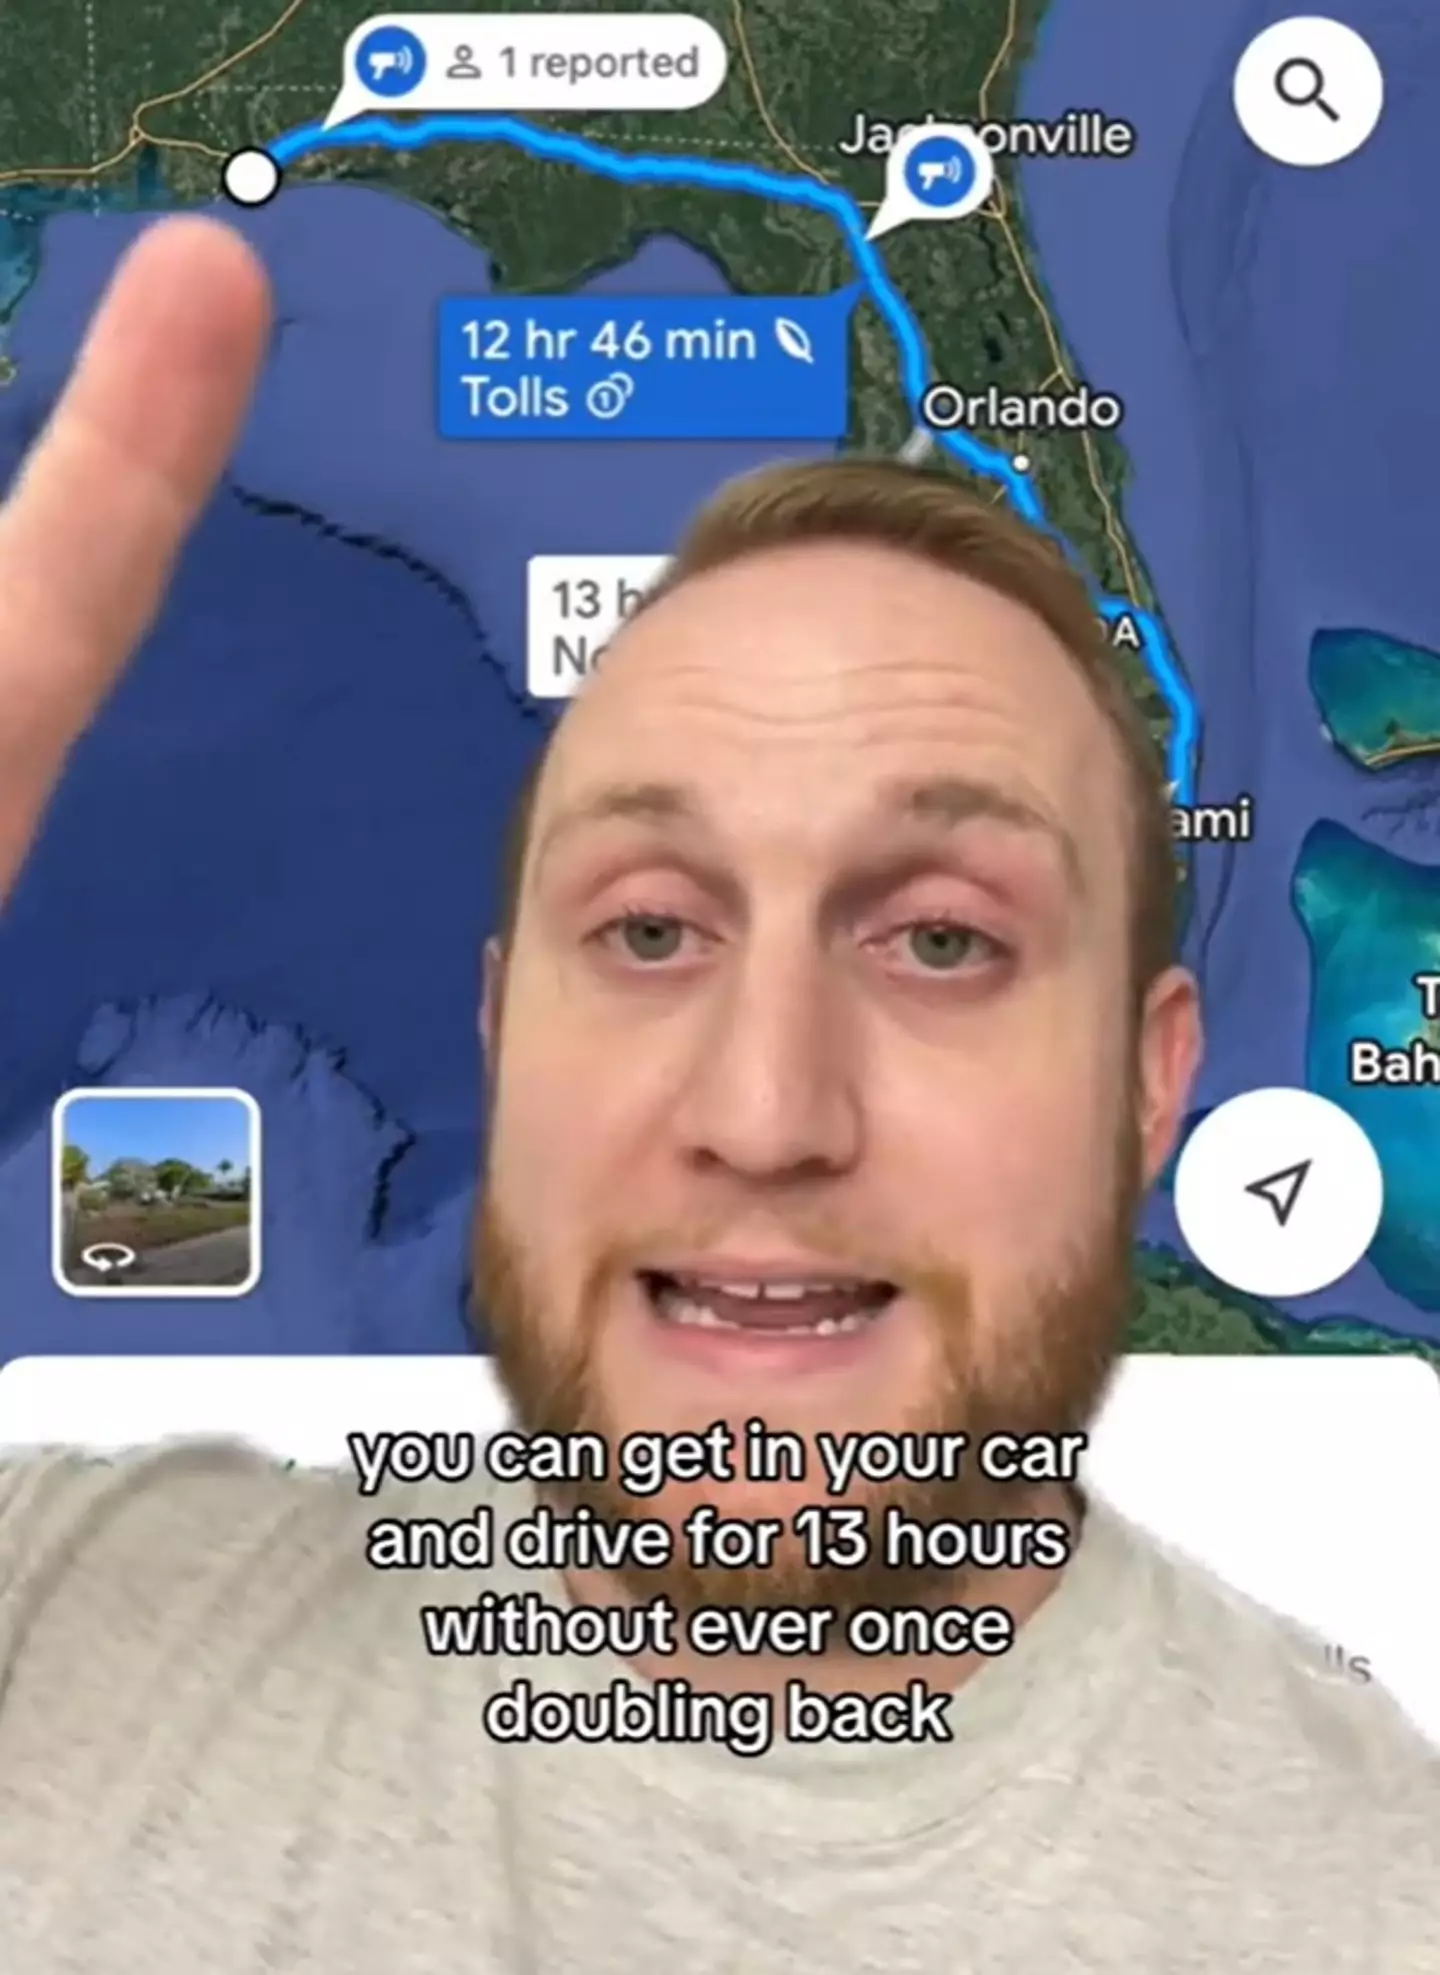 This TikToker reckons that because it takes 13 hours to drive through Florida all of England is 'a suburb of London'.